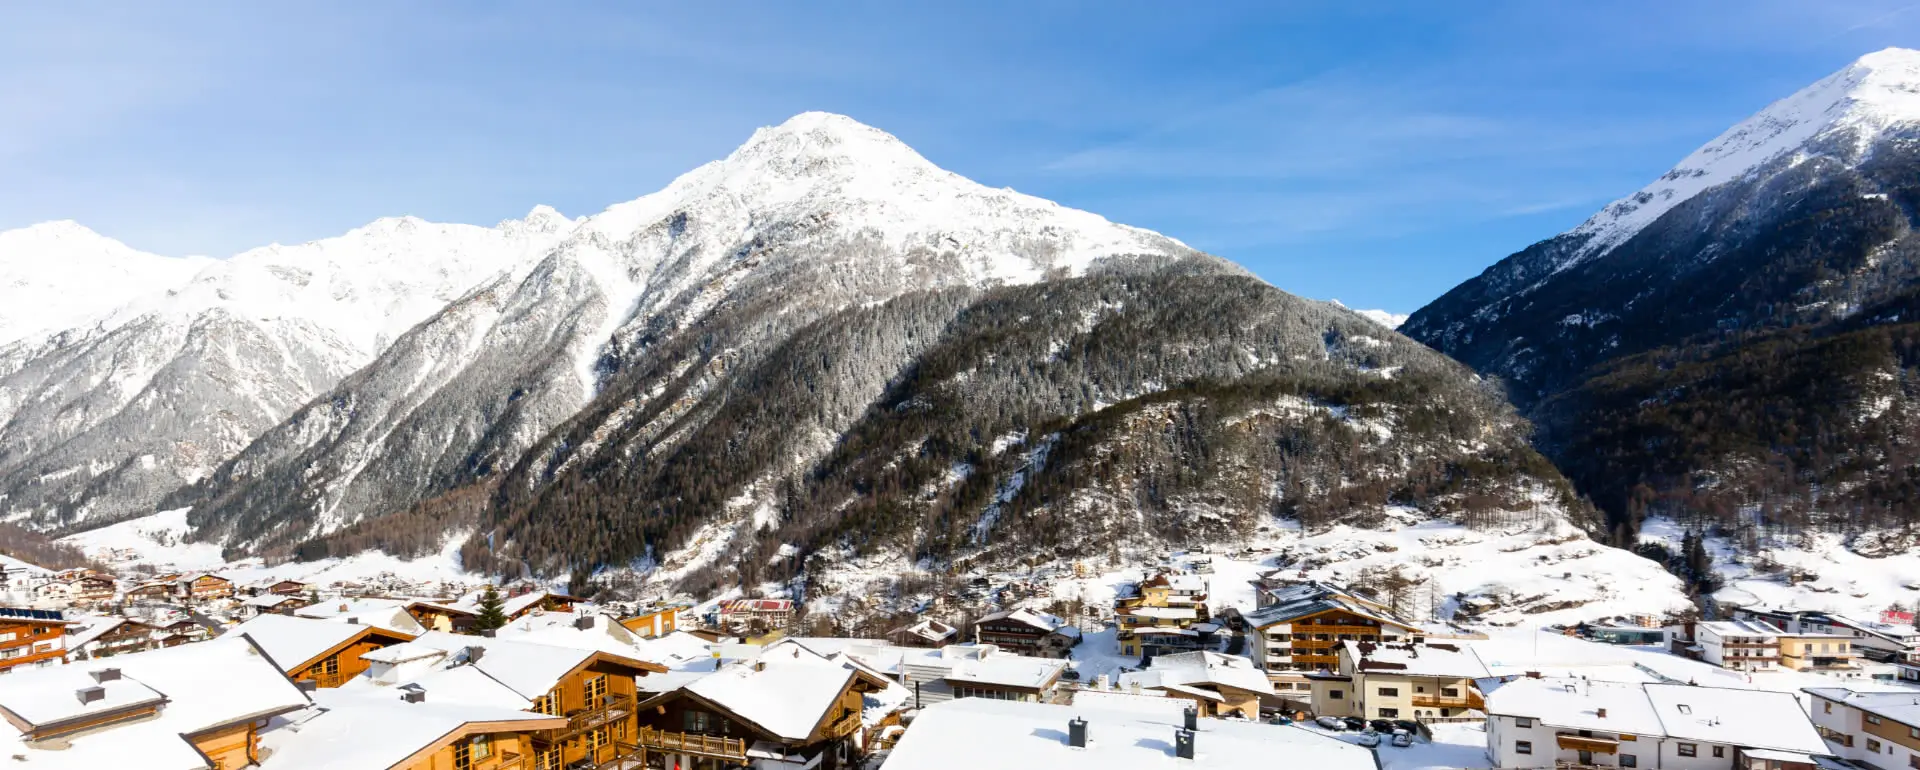 Soelden - the destination with youth hostels